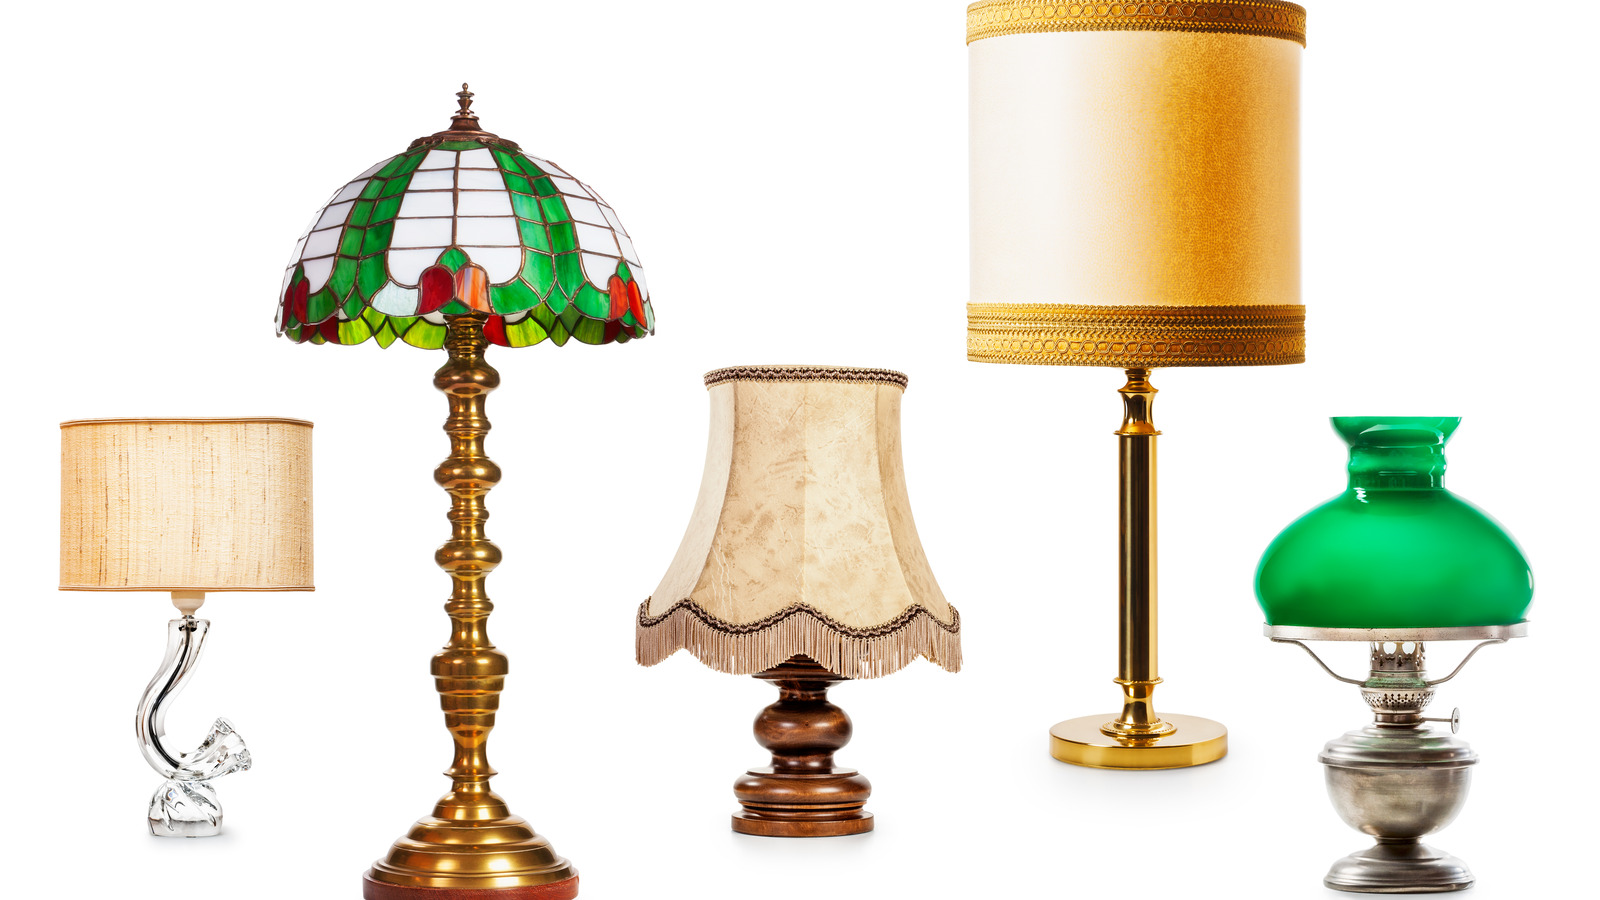 Here’s How To Properly Clean Your Textured Lamp And Home Decor